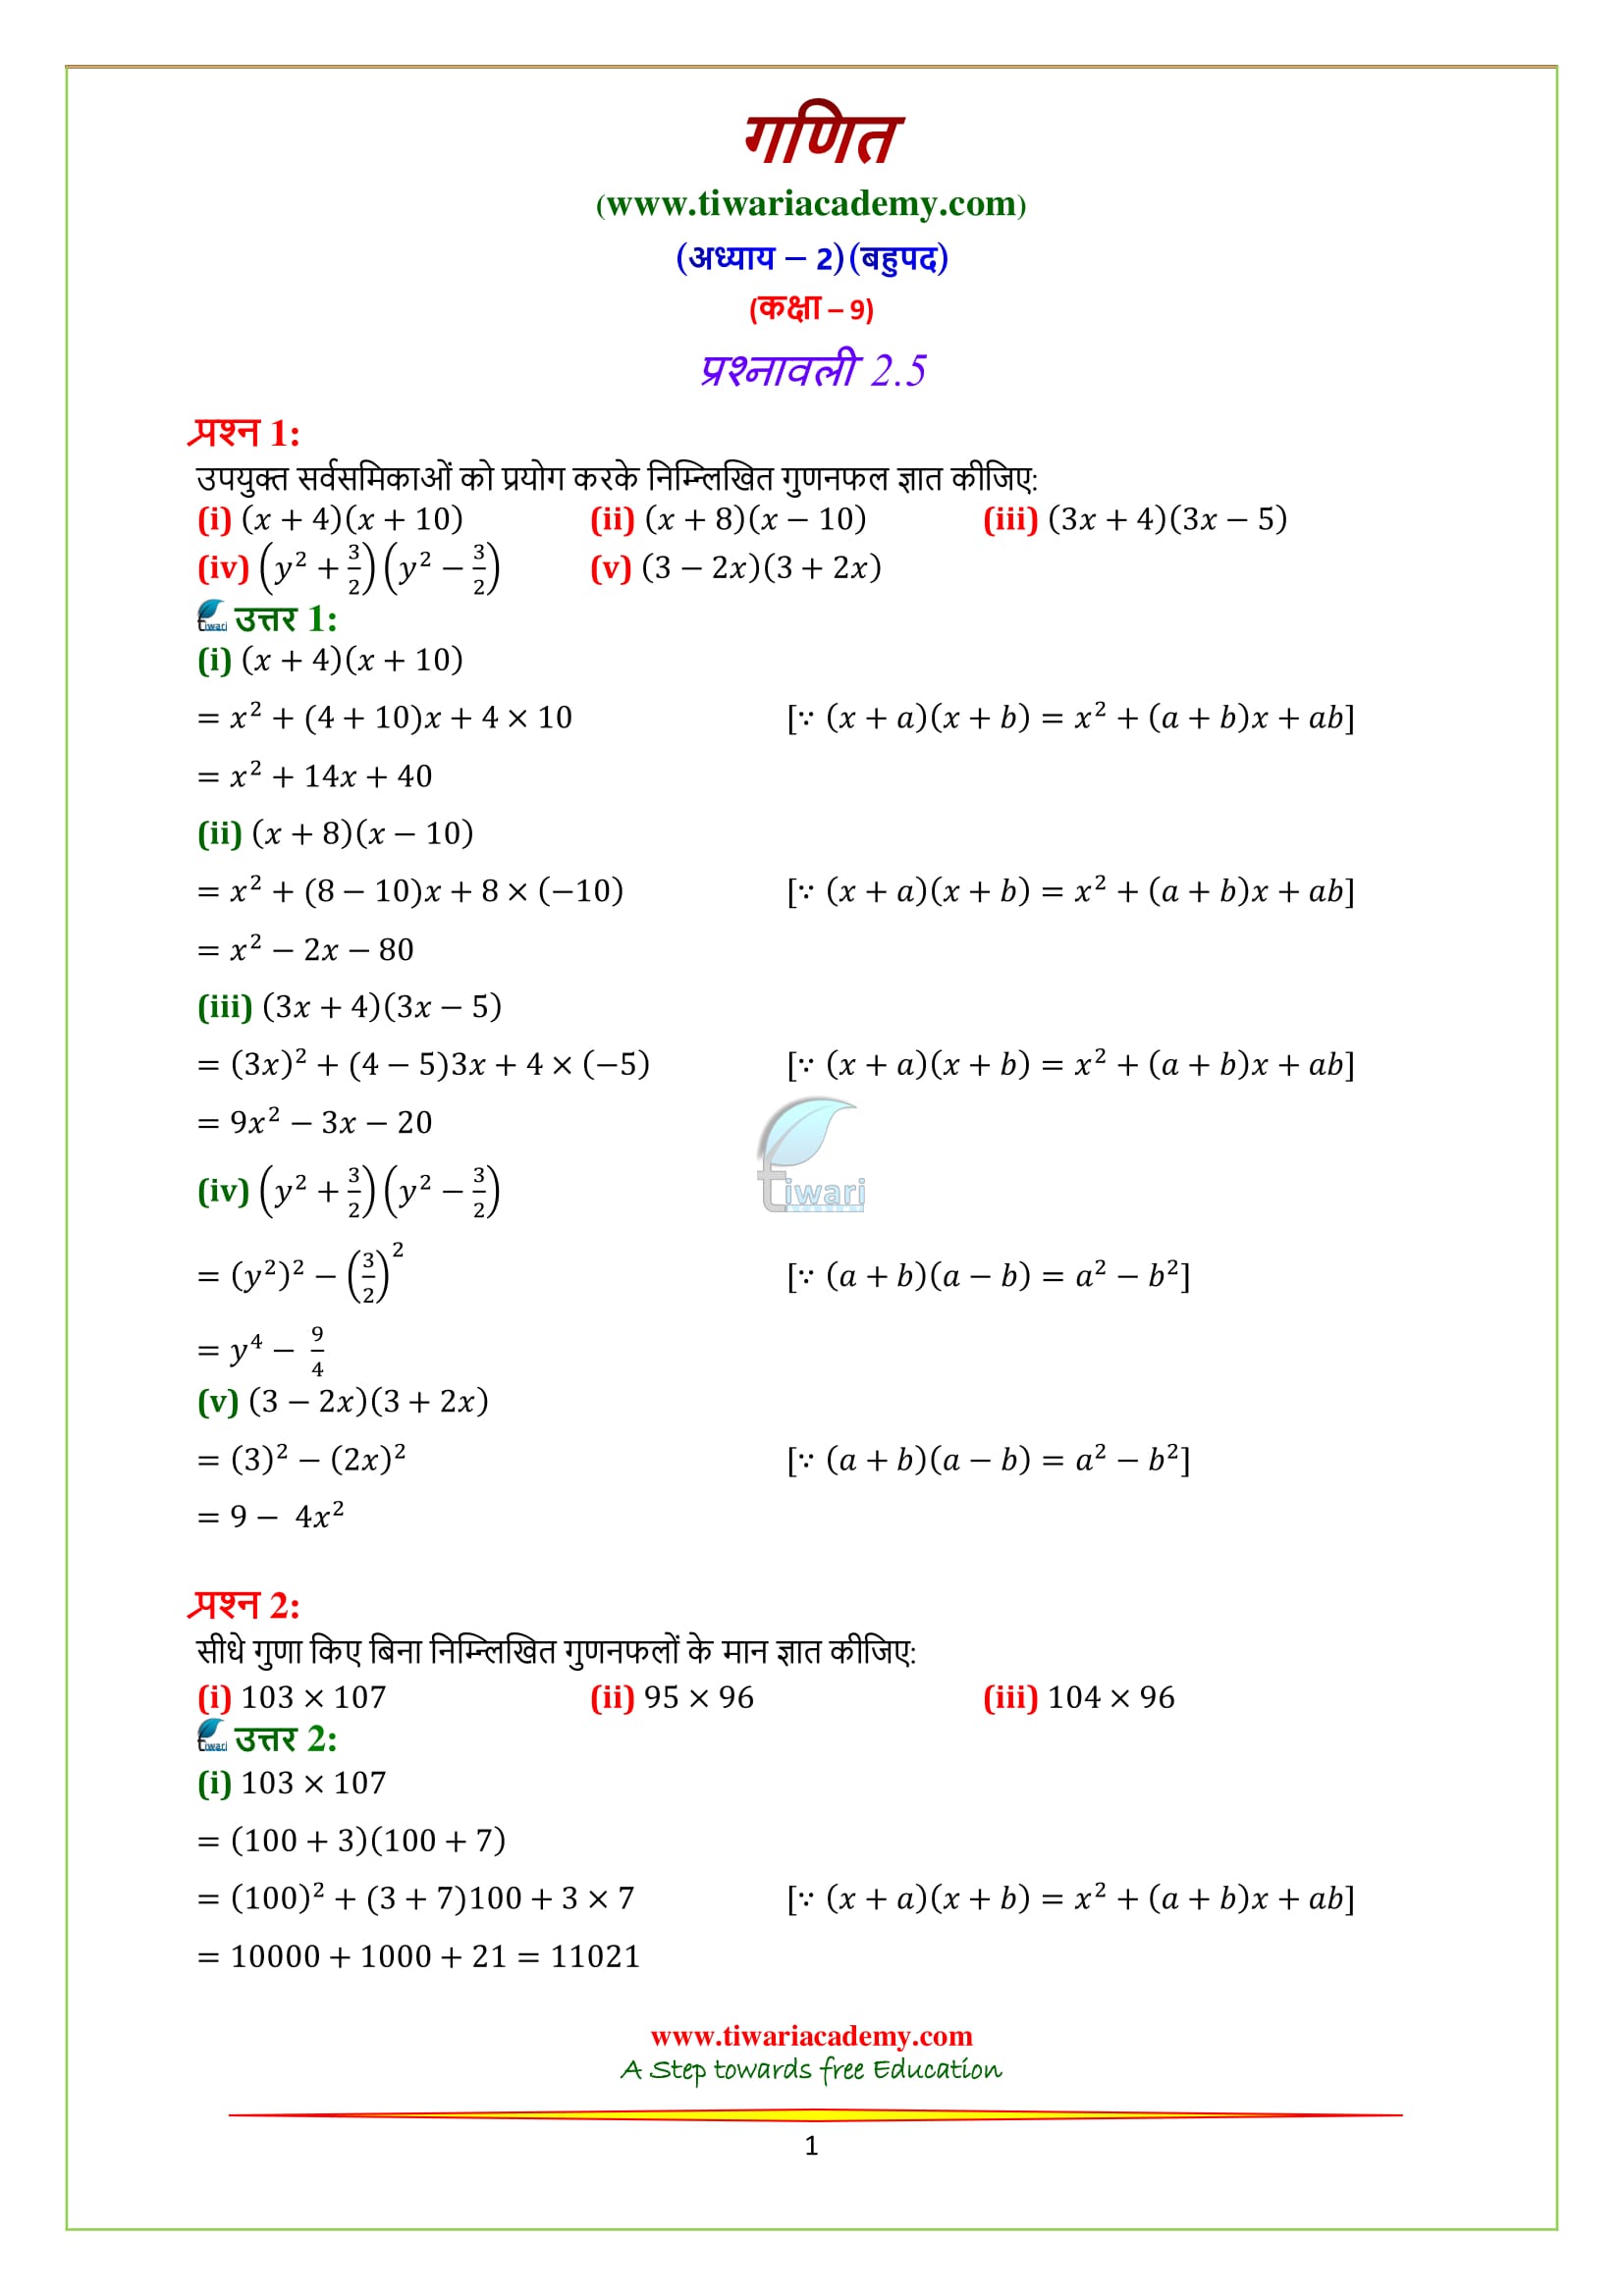 NCERT Solutions for class 9 Maths chapter 2 exercise 2.5 in PDF form